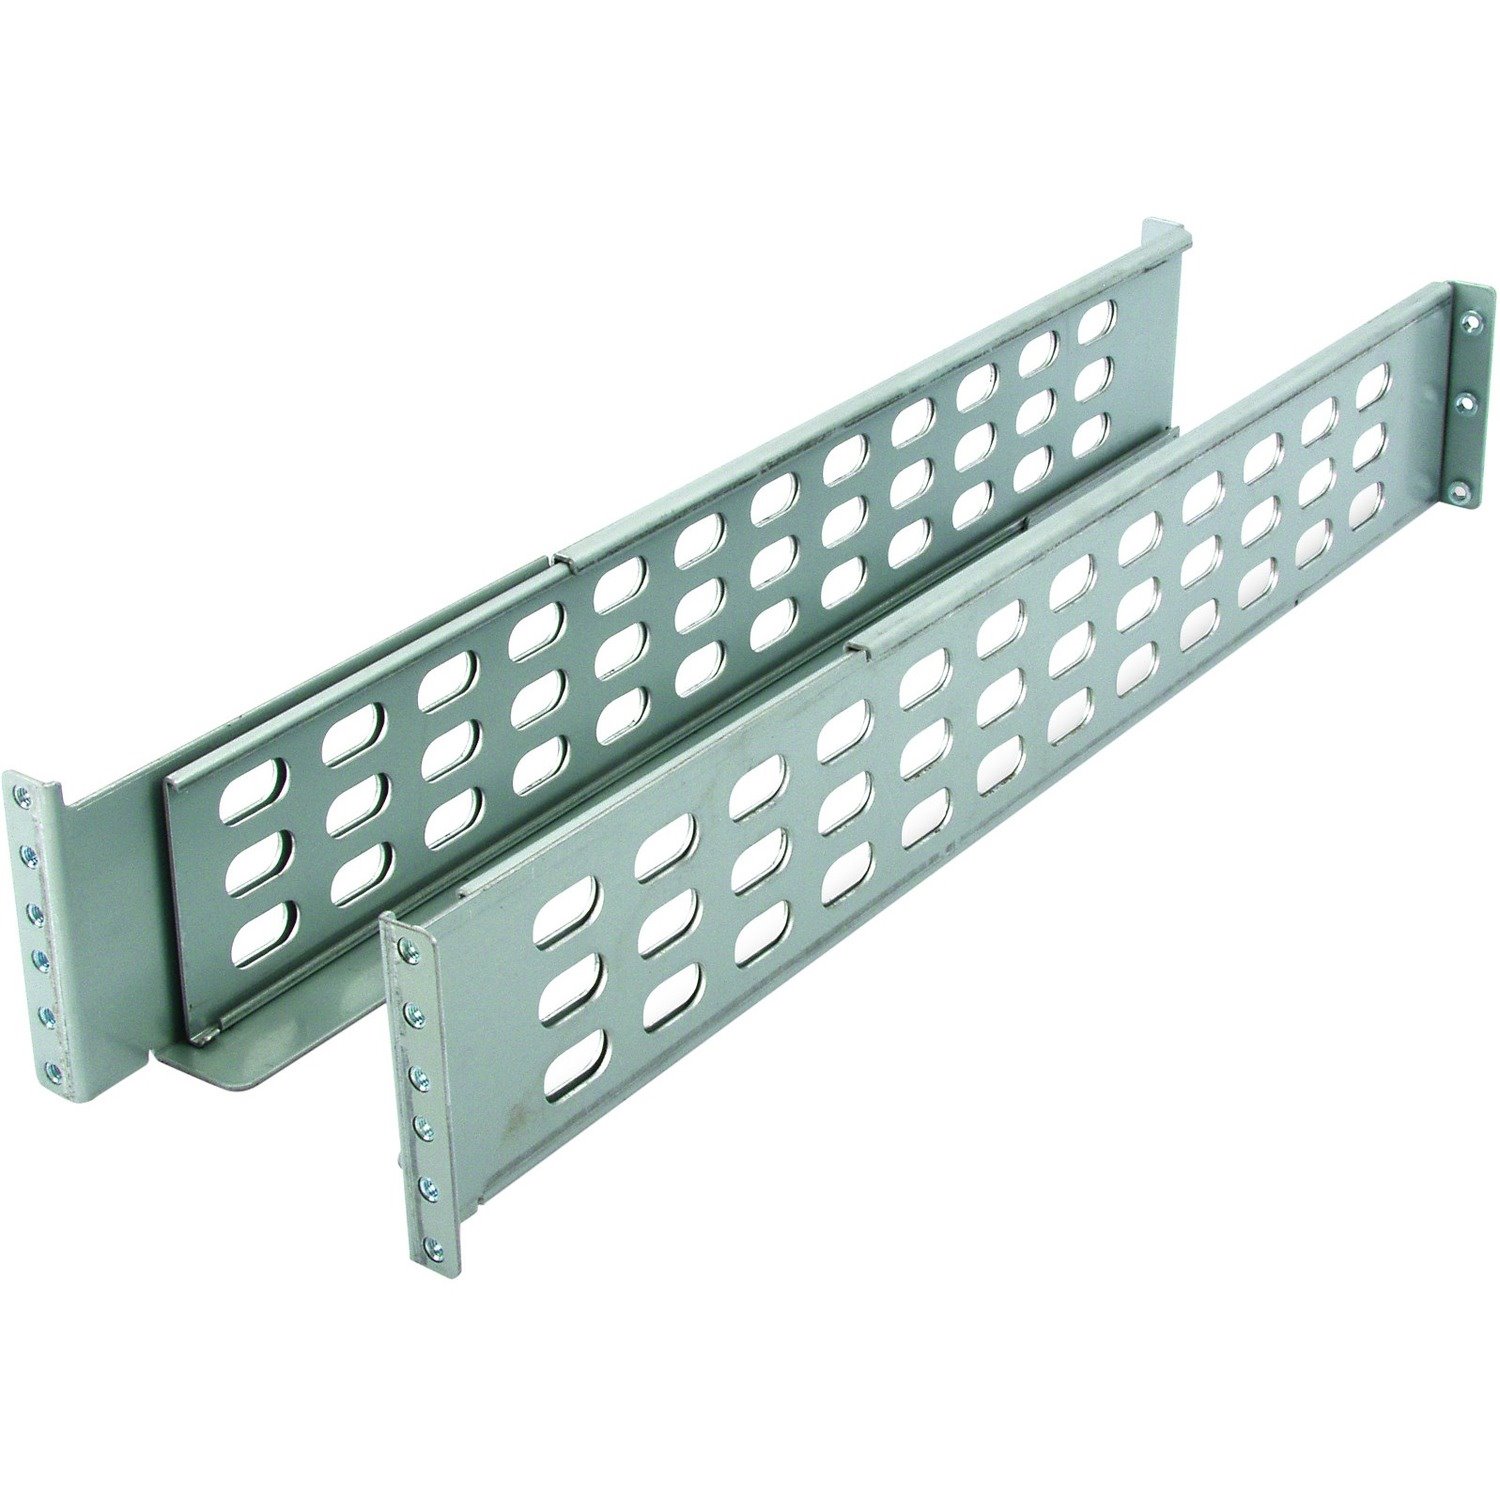 APC by Schneider Electric Mounting Rail Kit for Mounting Rail - Gray